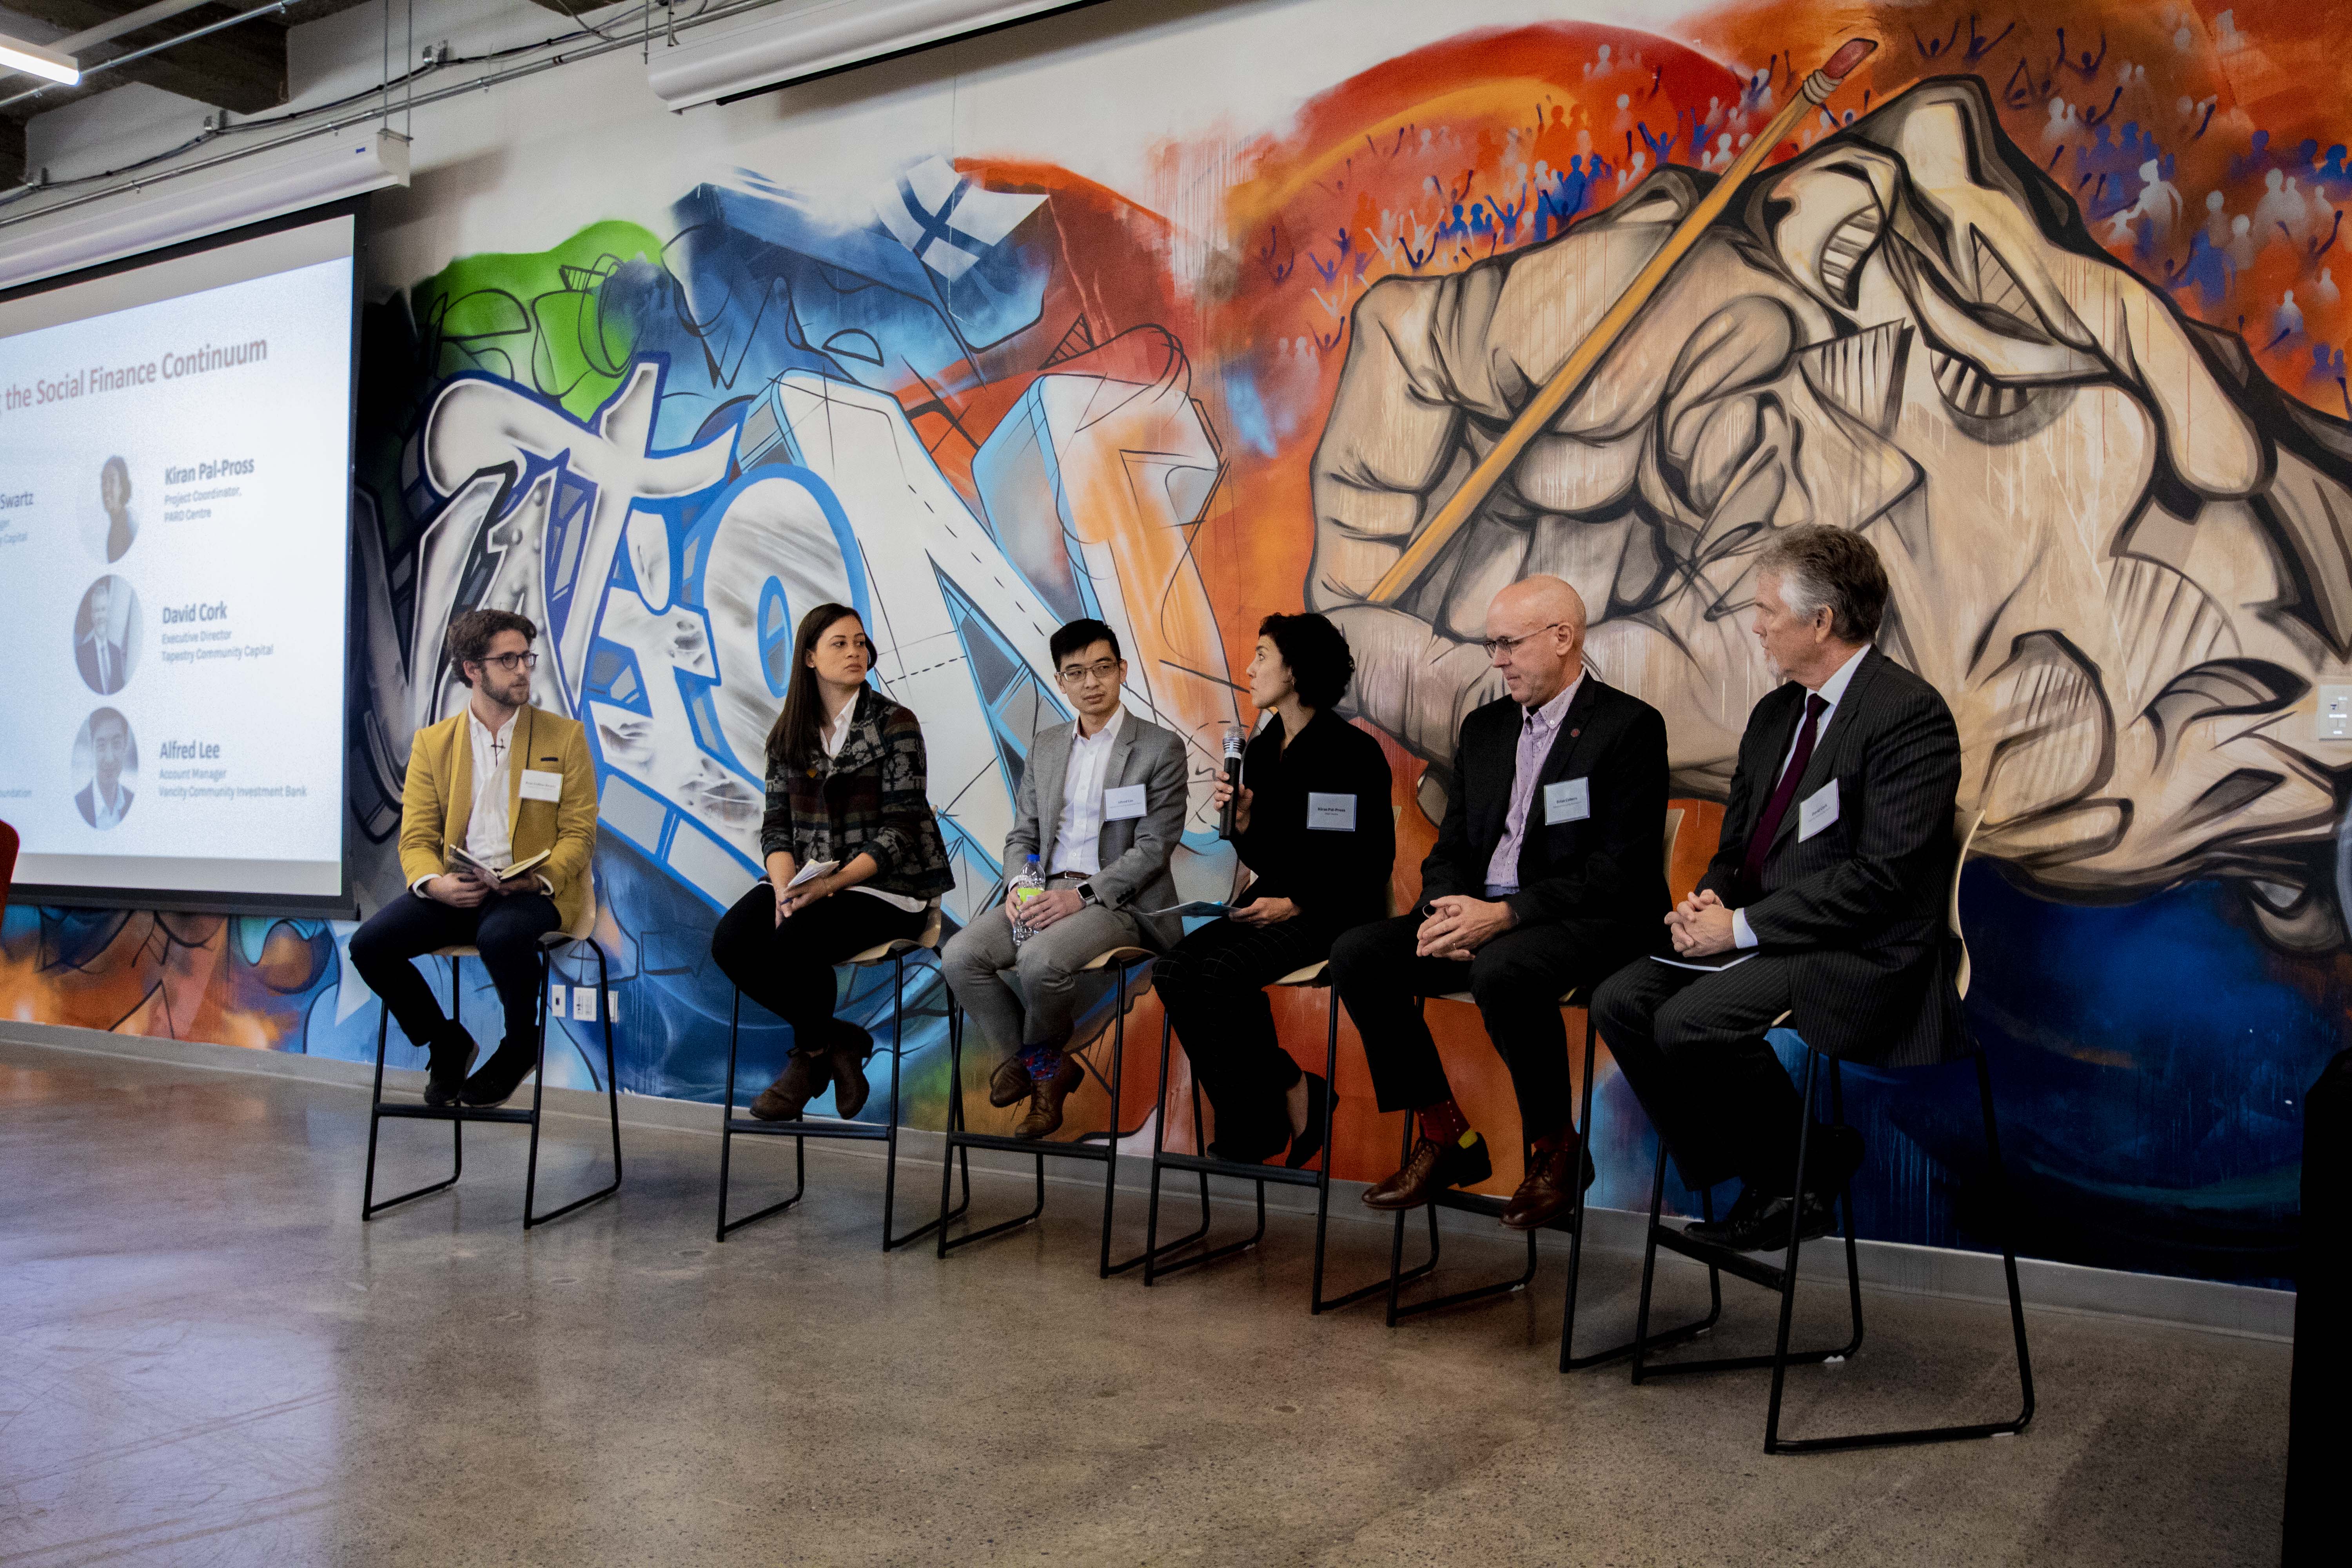 A panel of speakers sitting on stools